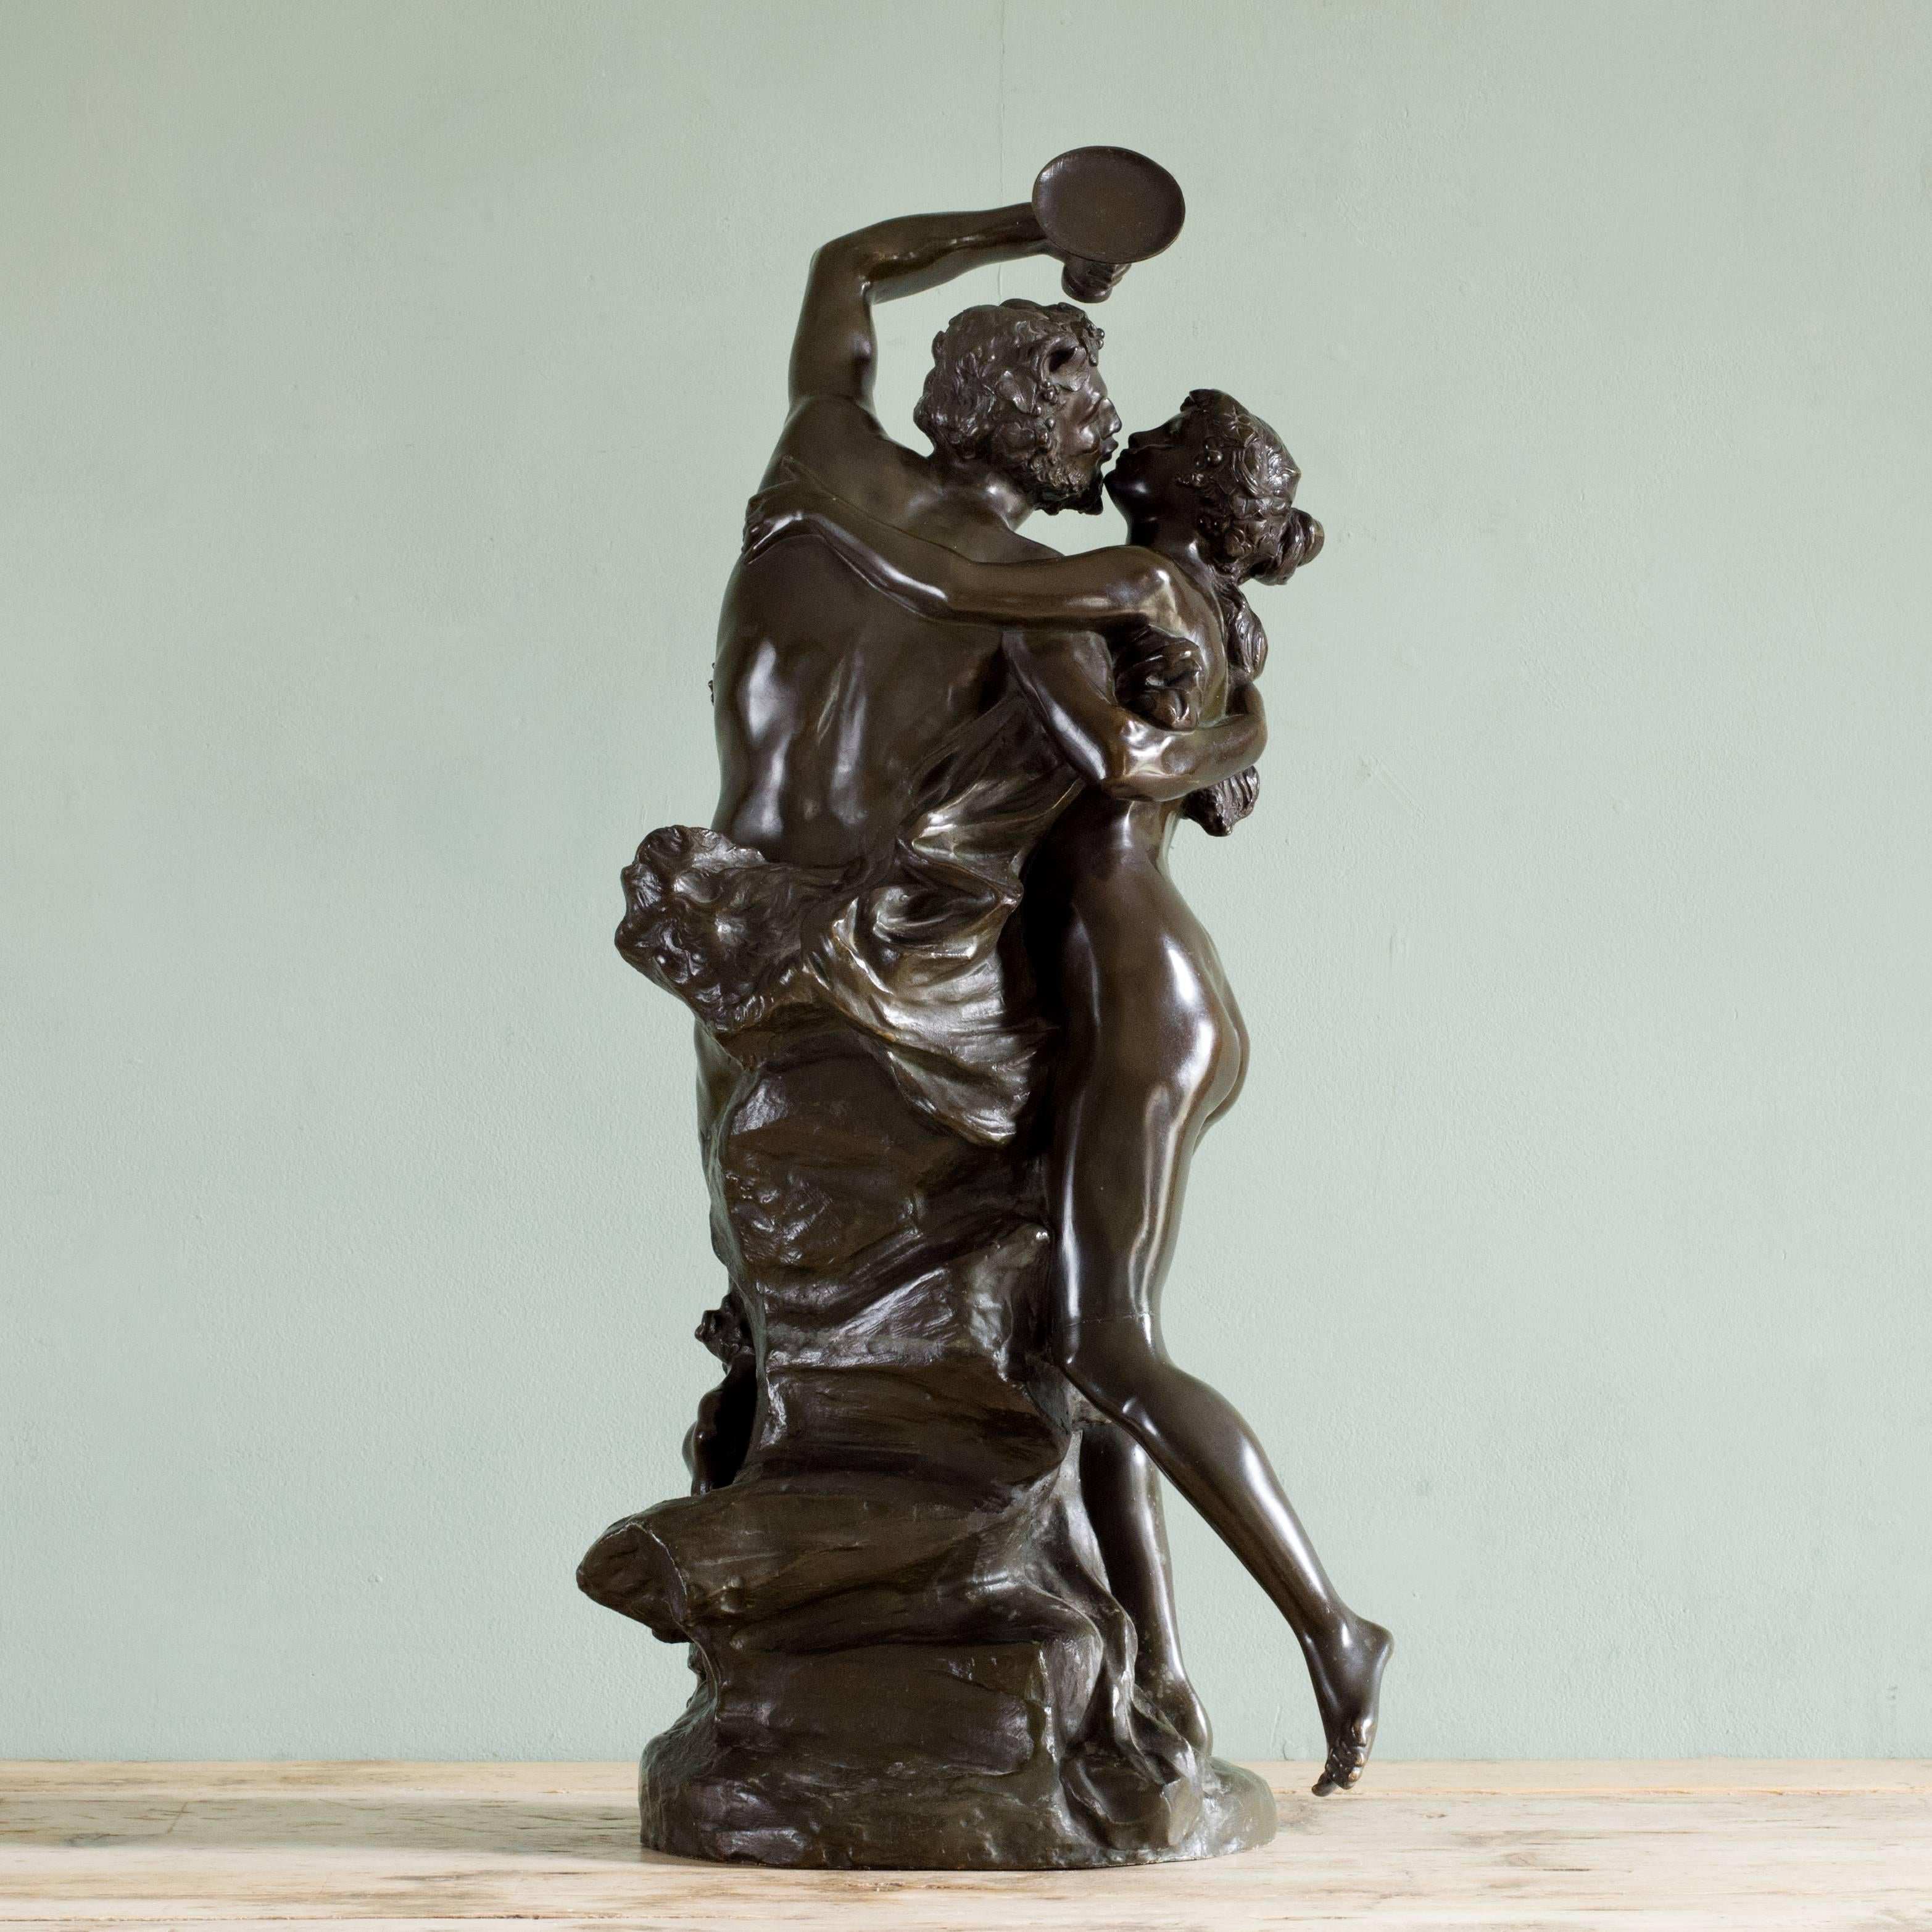 A bronze sculpture of a dancing satyr and bacchante, after Claude Michel 'Clodion', mid-19th century, signed Clodion.

Dimensions: 65cm (25½